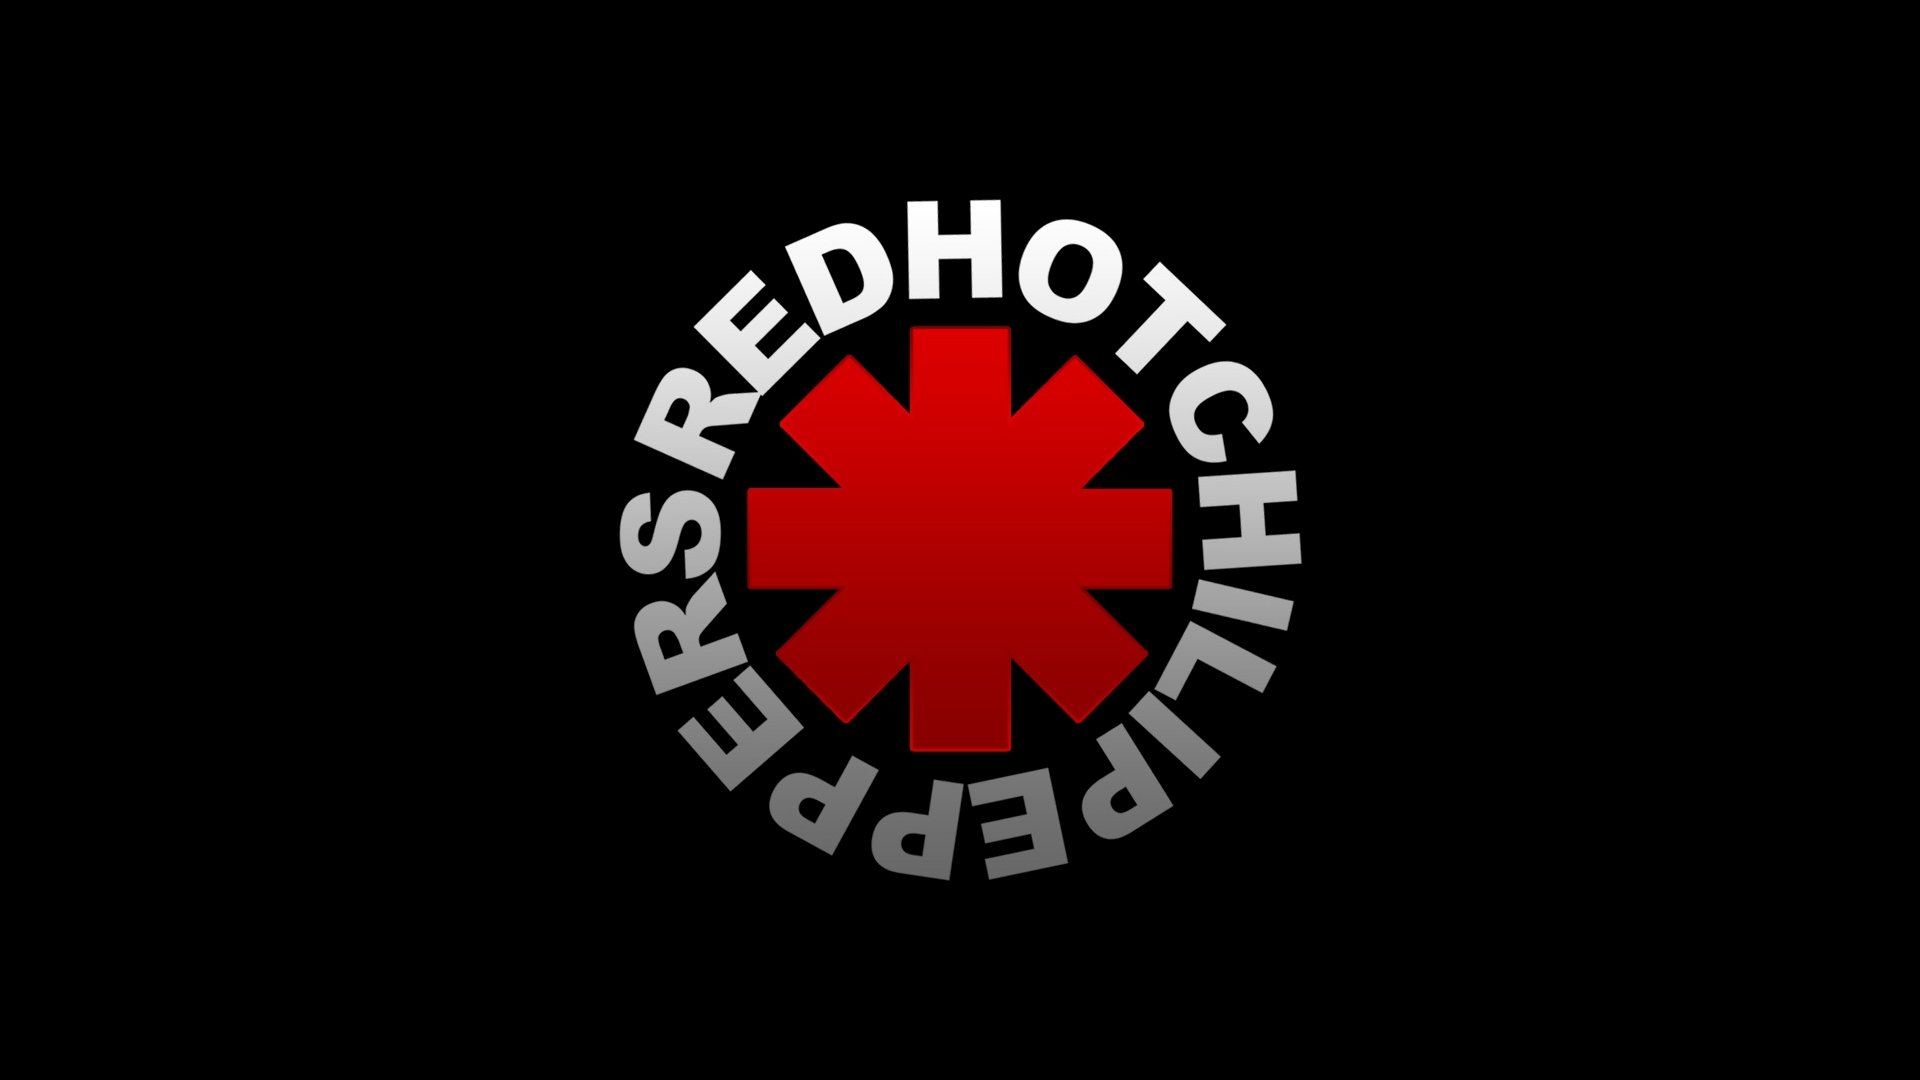 Red hot chili peppers love. Red hot Chili Peppers логотип группы. Red hot Chili Peppers знак. Ред хот Чили пеперс эмблема. RHCP знак.